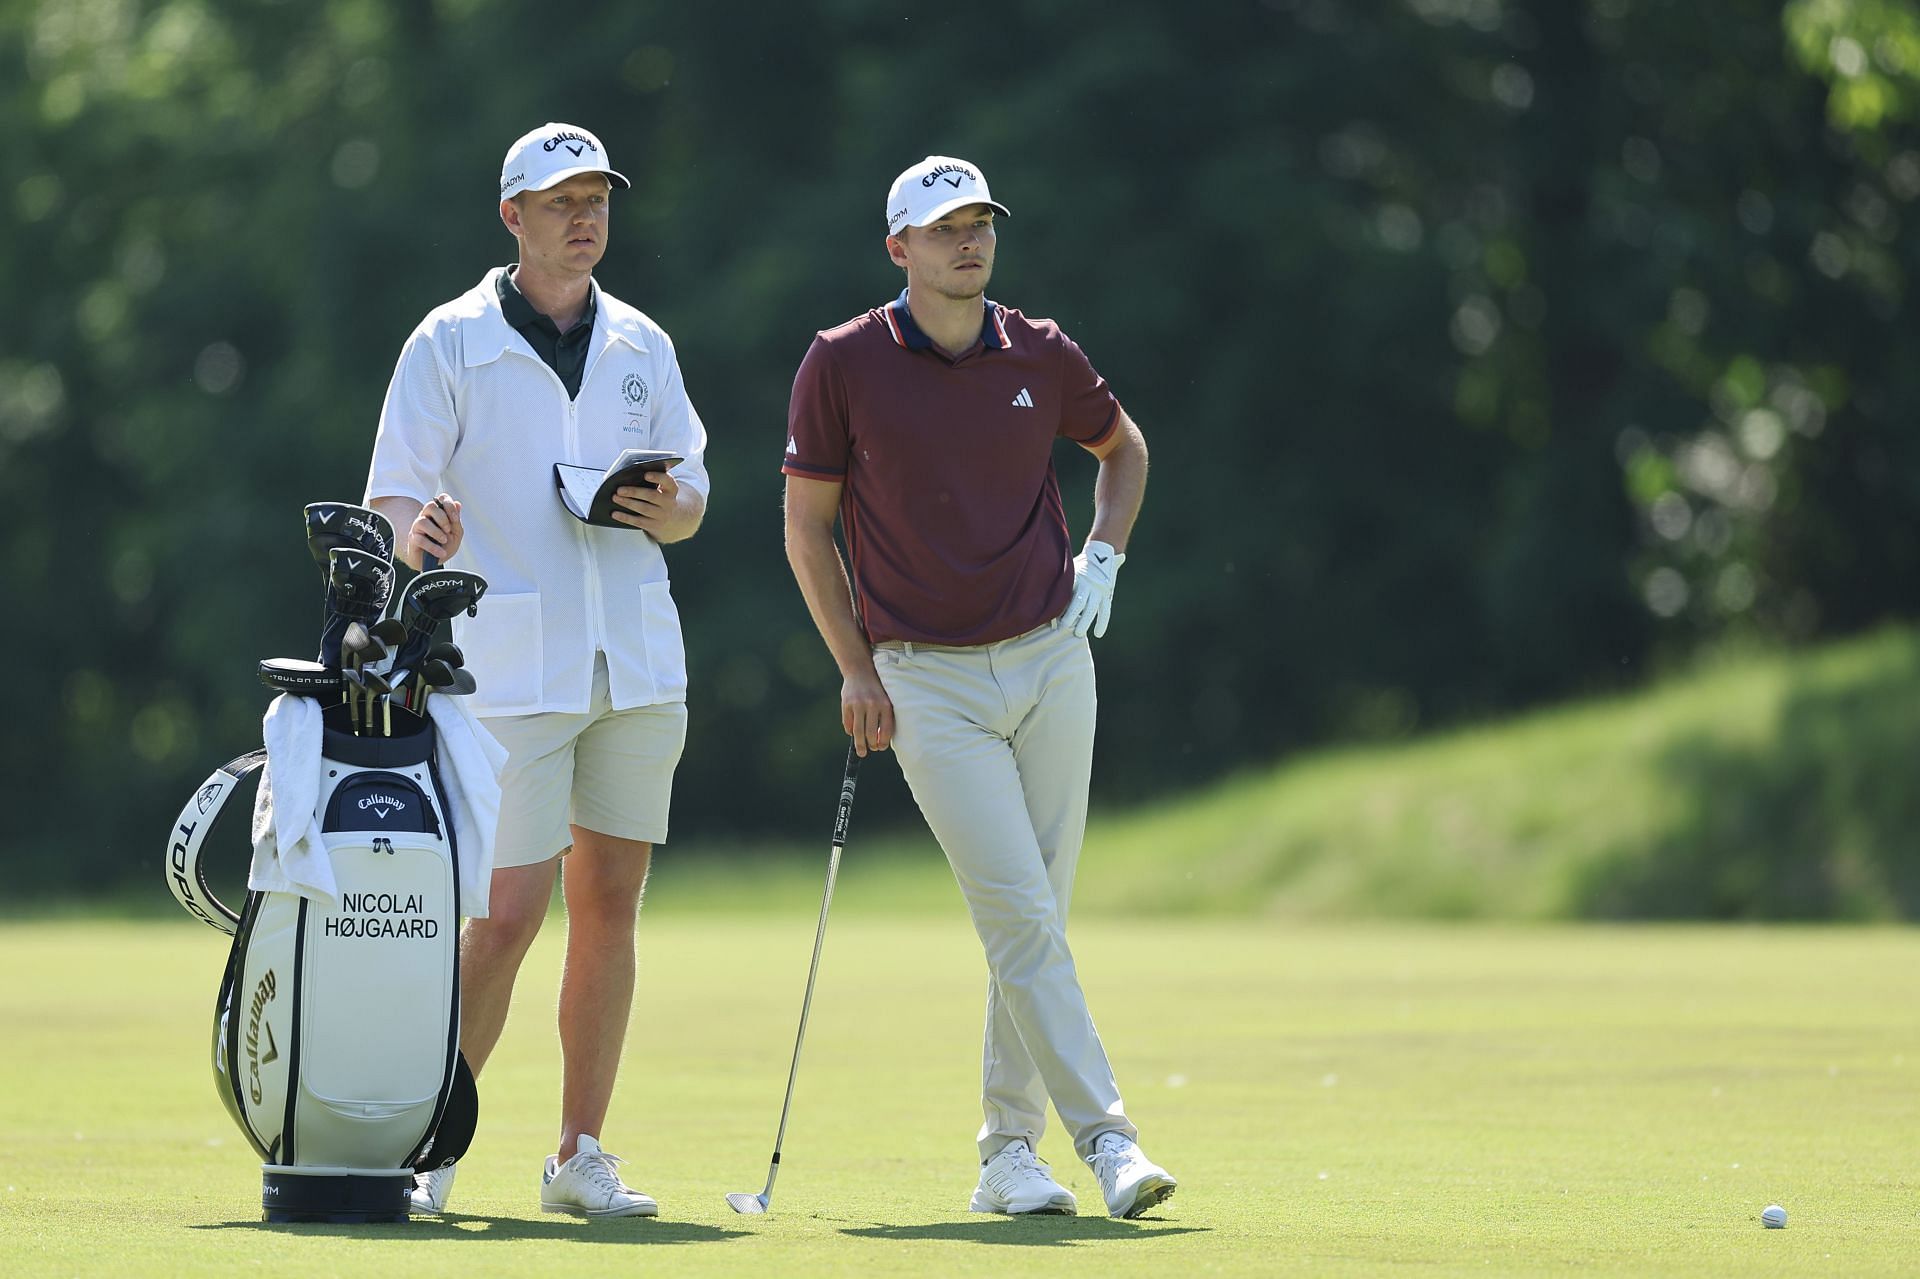 Who is Nicolai Hojgaard’s caddie? All you need to know about the golfer ...